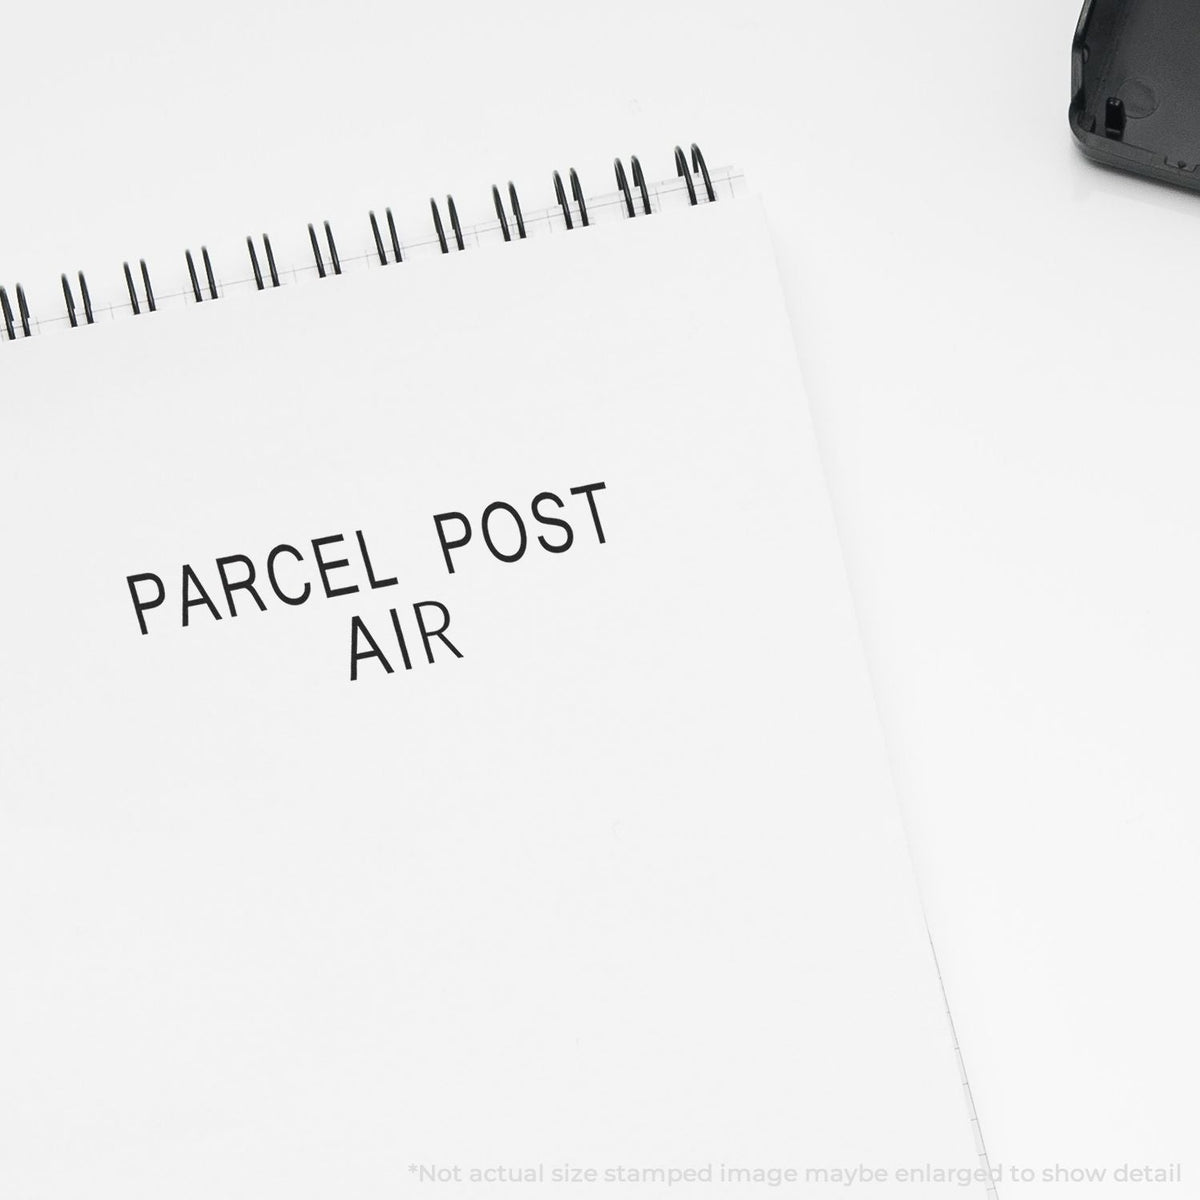 Self-Inking Parcel Post Air Stamp In Use Photo